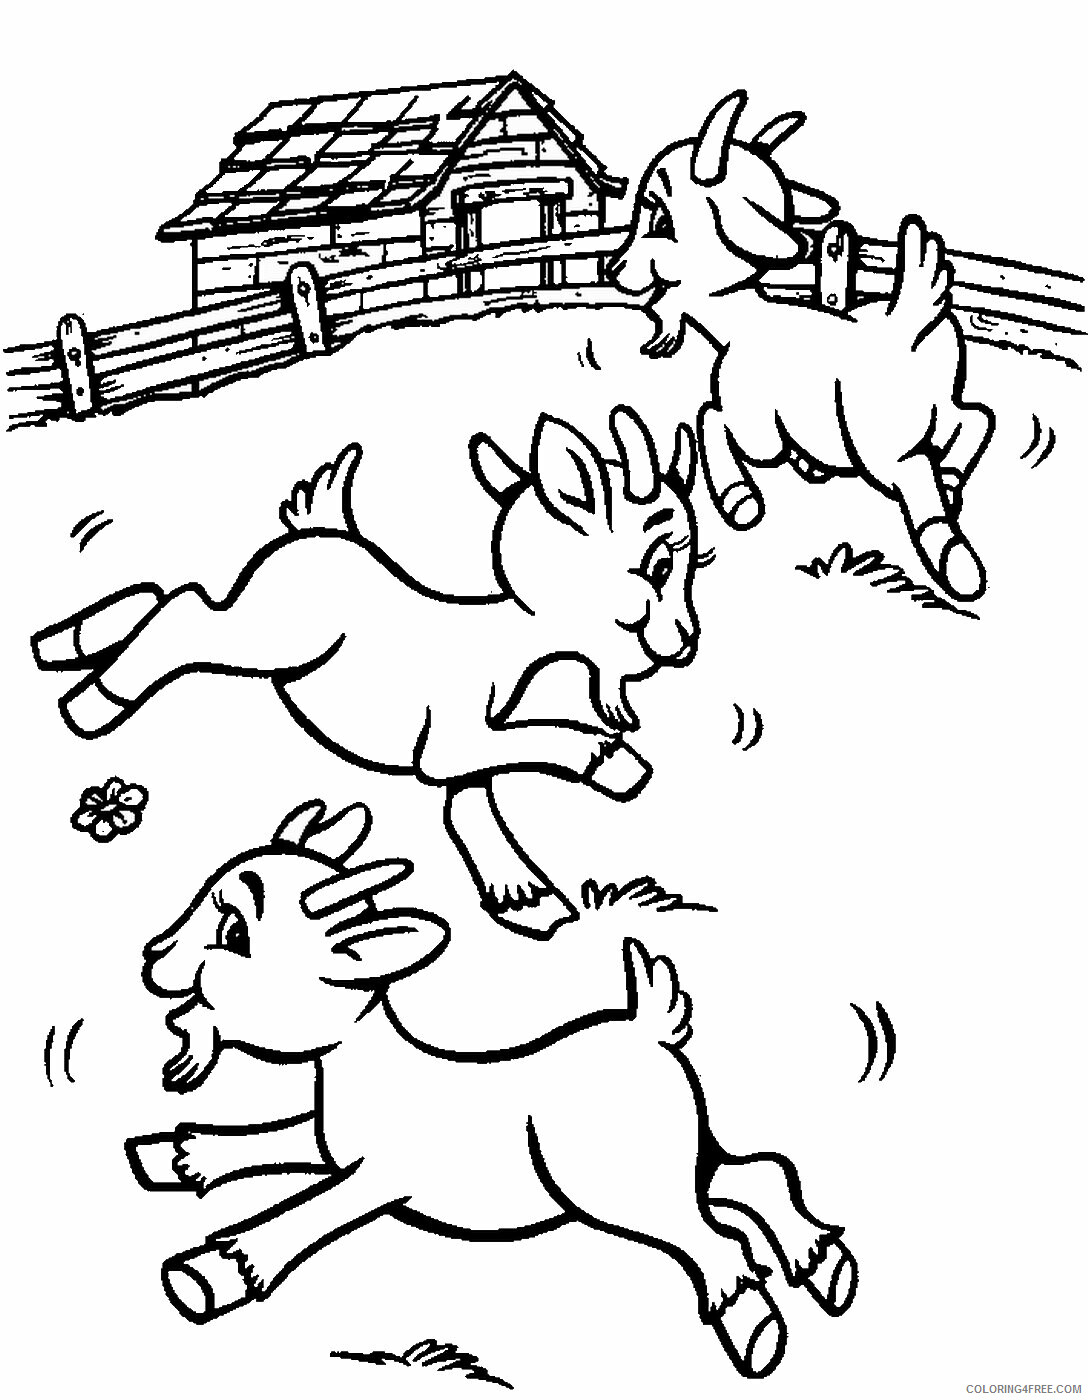 Goat Coloring Pages Animal Printable Sheets goat_cl_04 2021 2449 Coloring4free